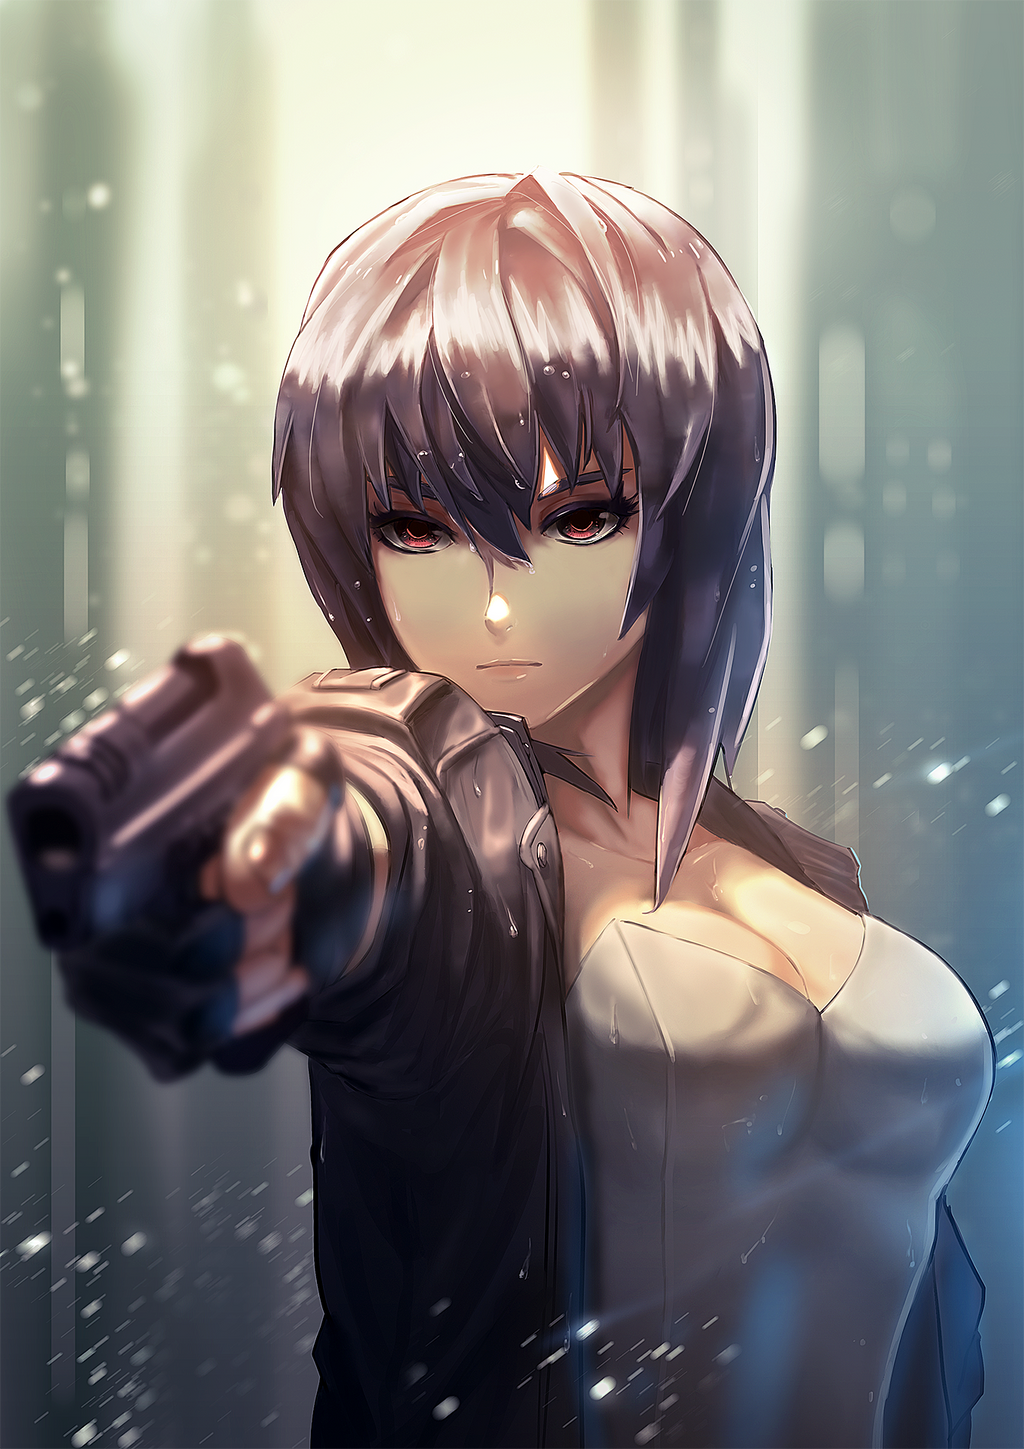 ghost_in_the_shell_by_ctiahao_db57ktu-fullview.png